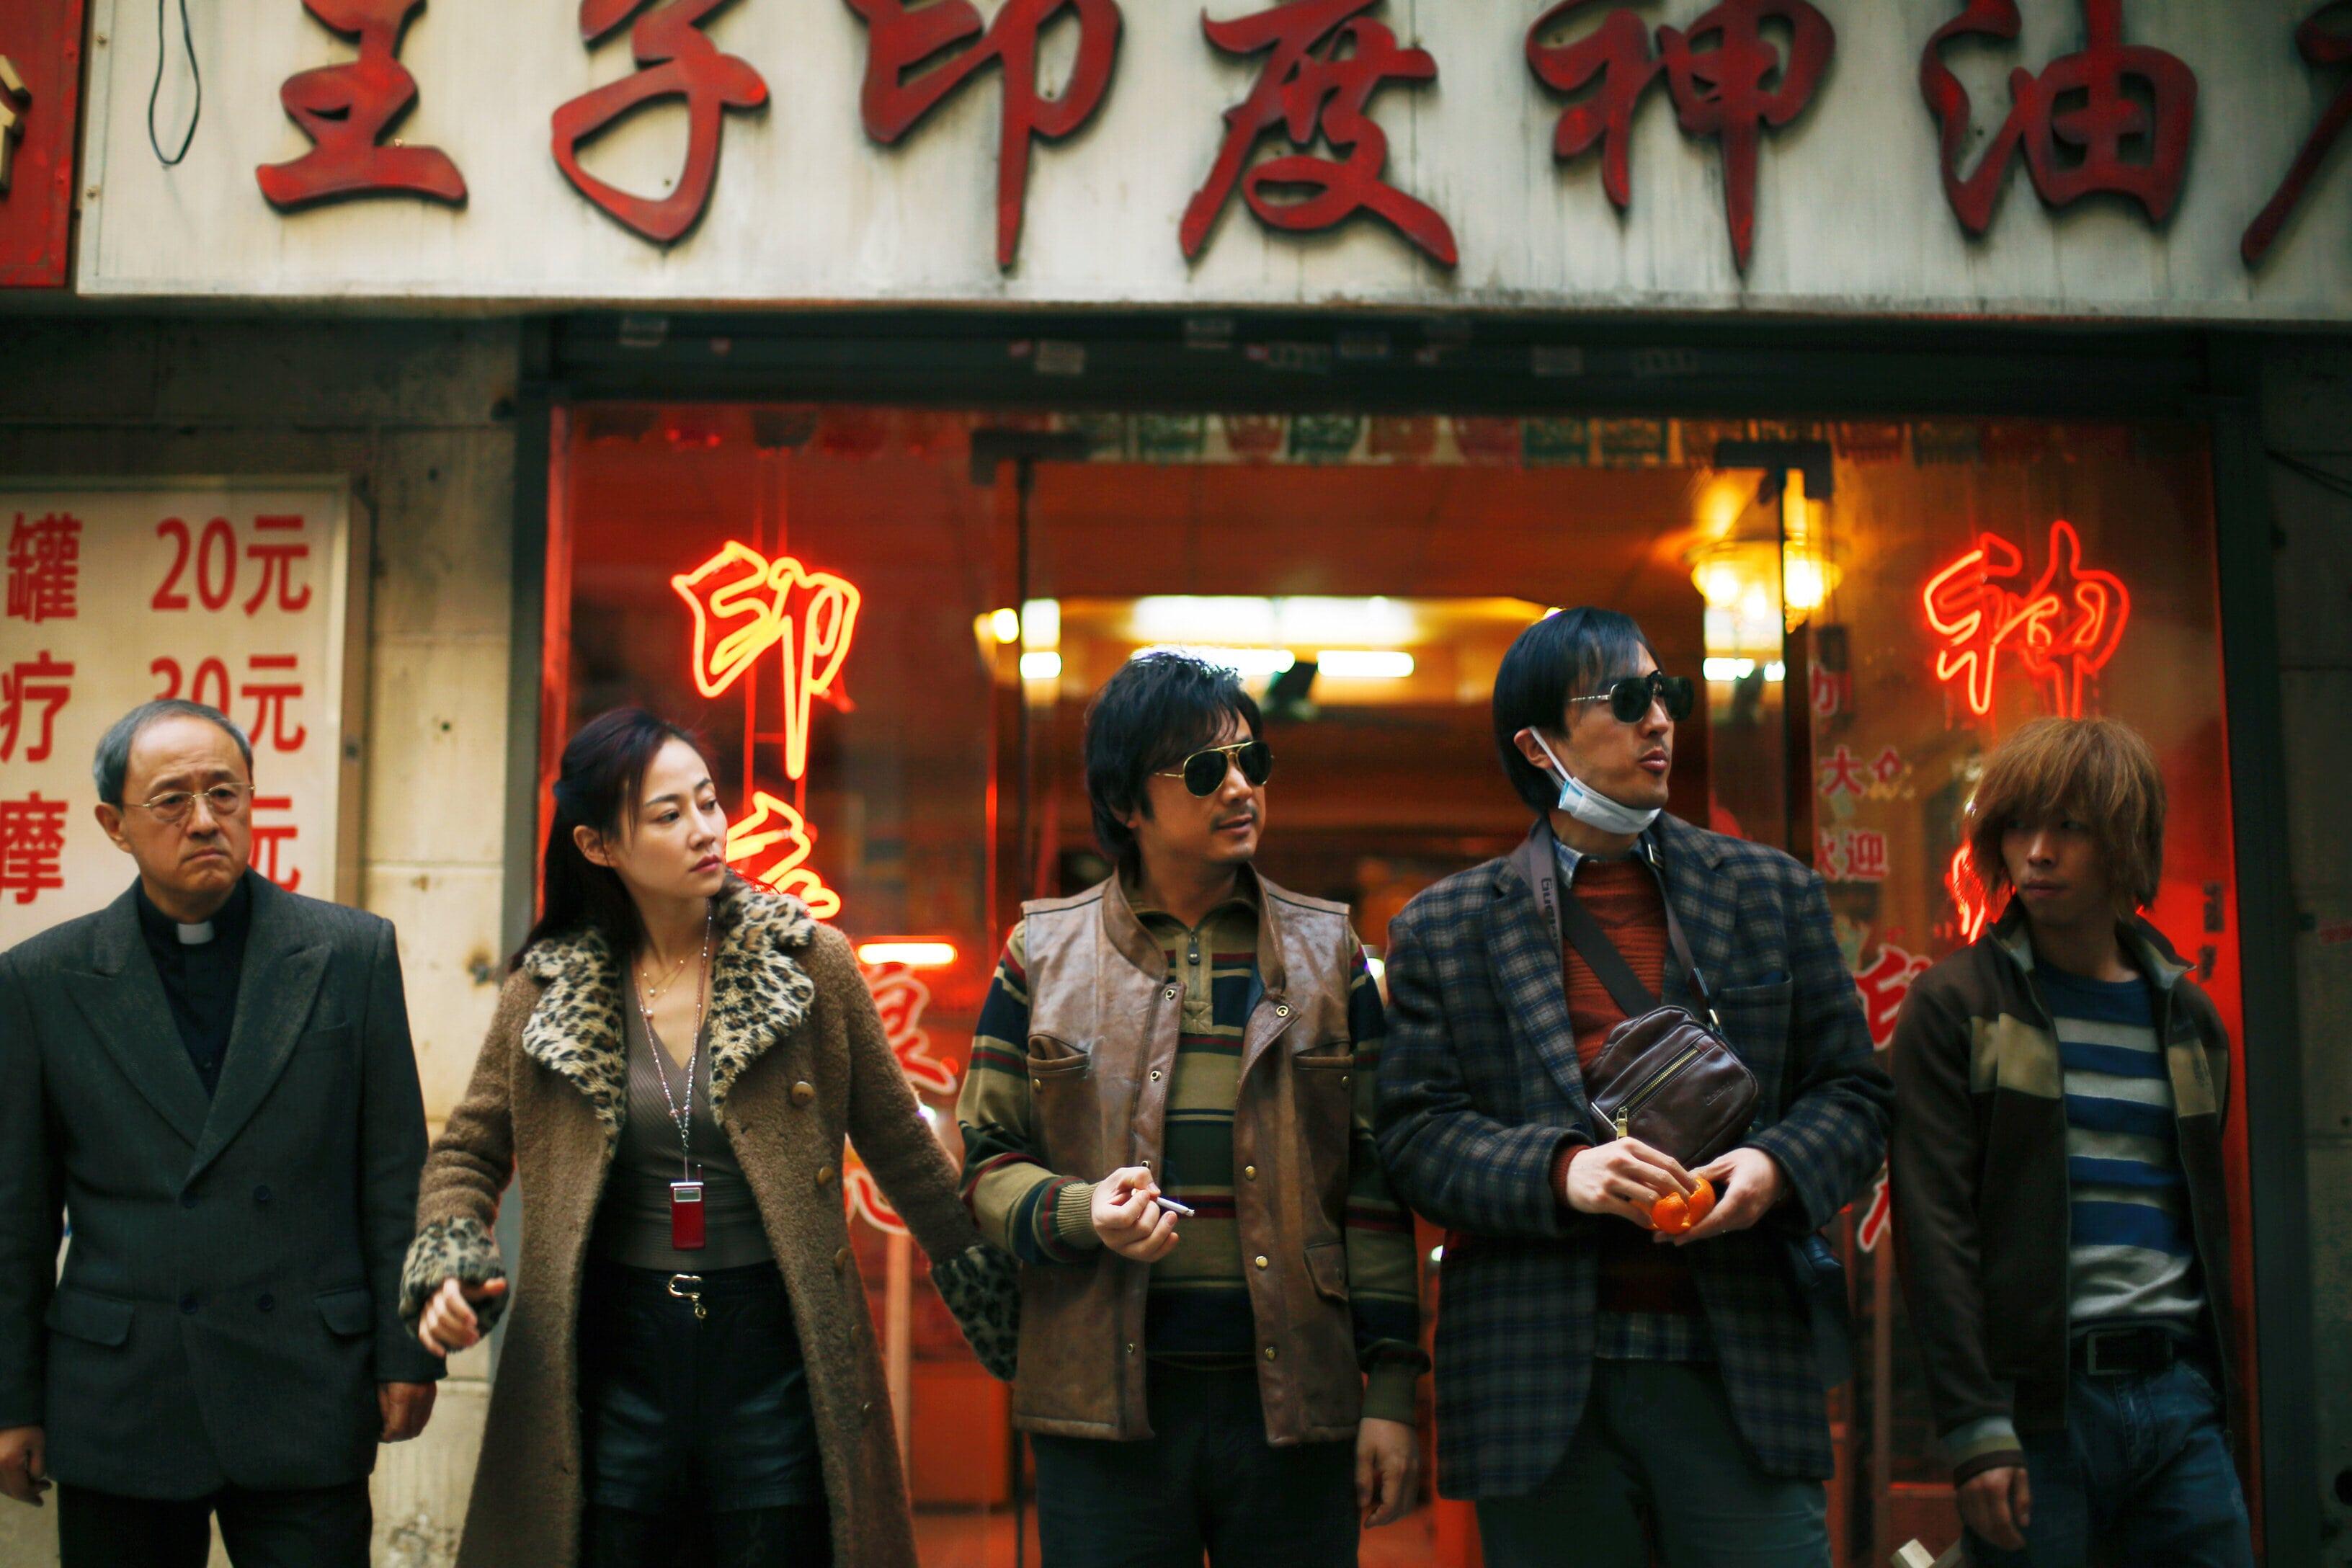 Jointly presented by the Leisure and Cultural Services Department and the South China Film Industry Workers Union, Chinese Film Panorama 2022 will be held from October 18 to November 26, screening 10 distinguished comedies produced in the Mainland. Photo shows a film still of "Dying to Survive" (2018).
